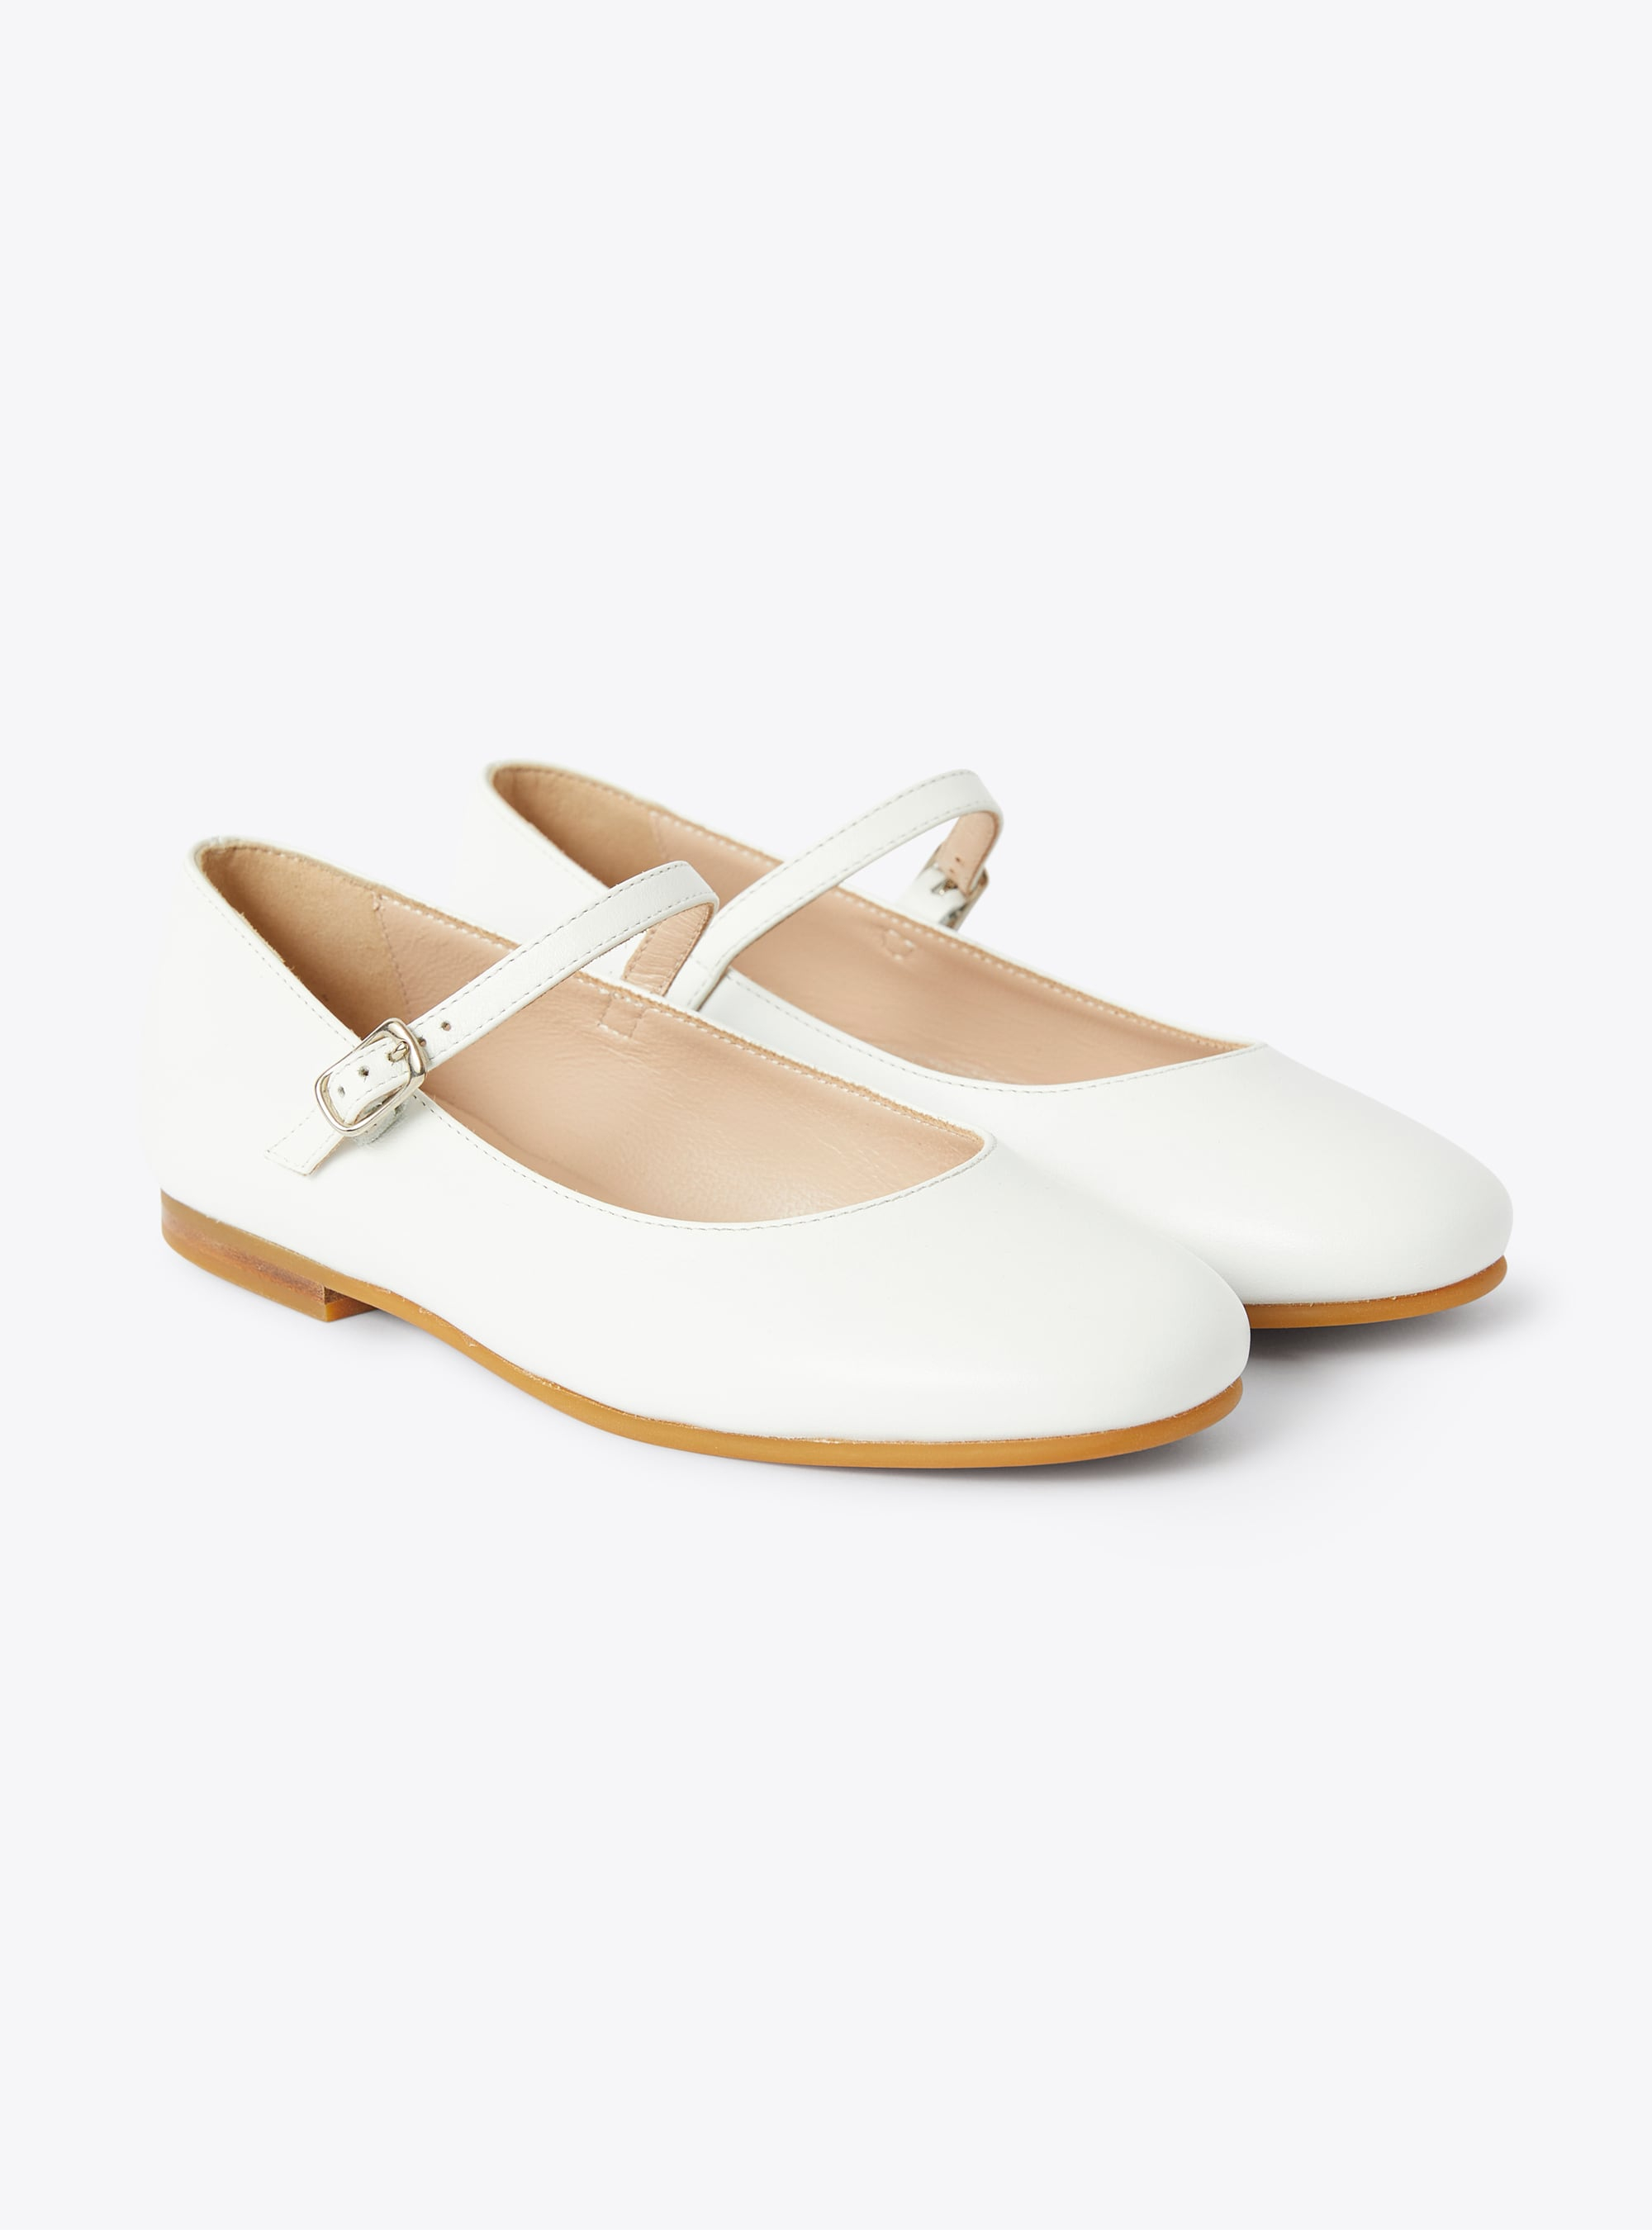 Ballerina flat shoes in white leather - Shoes - Il Gufo